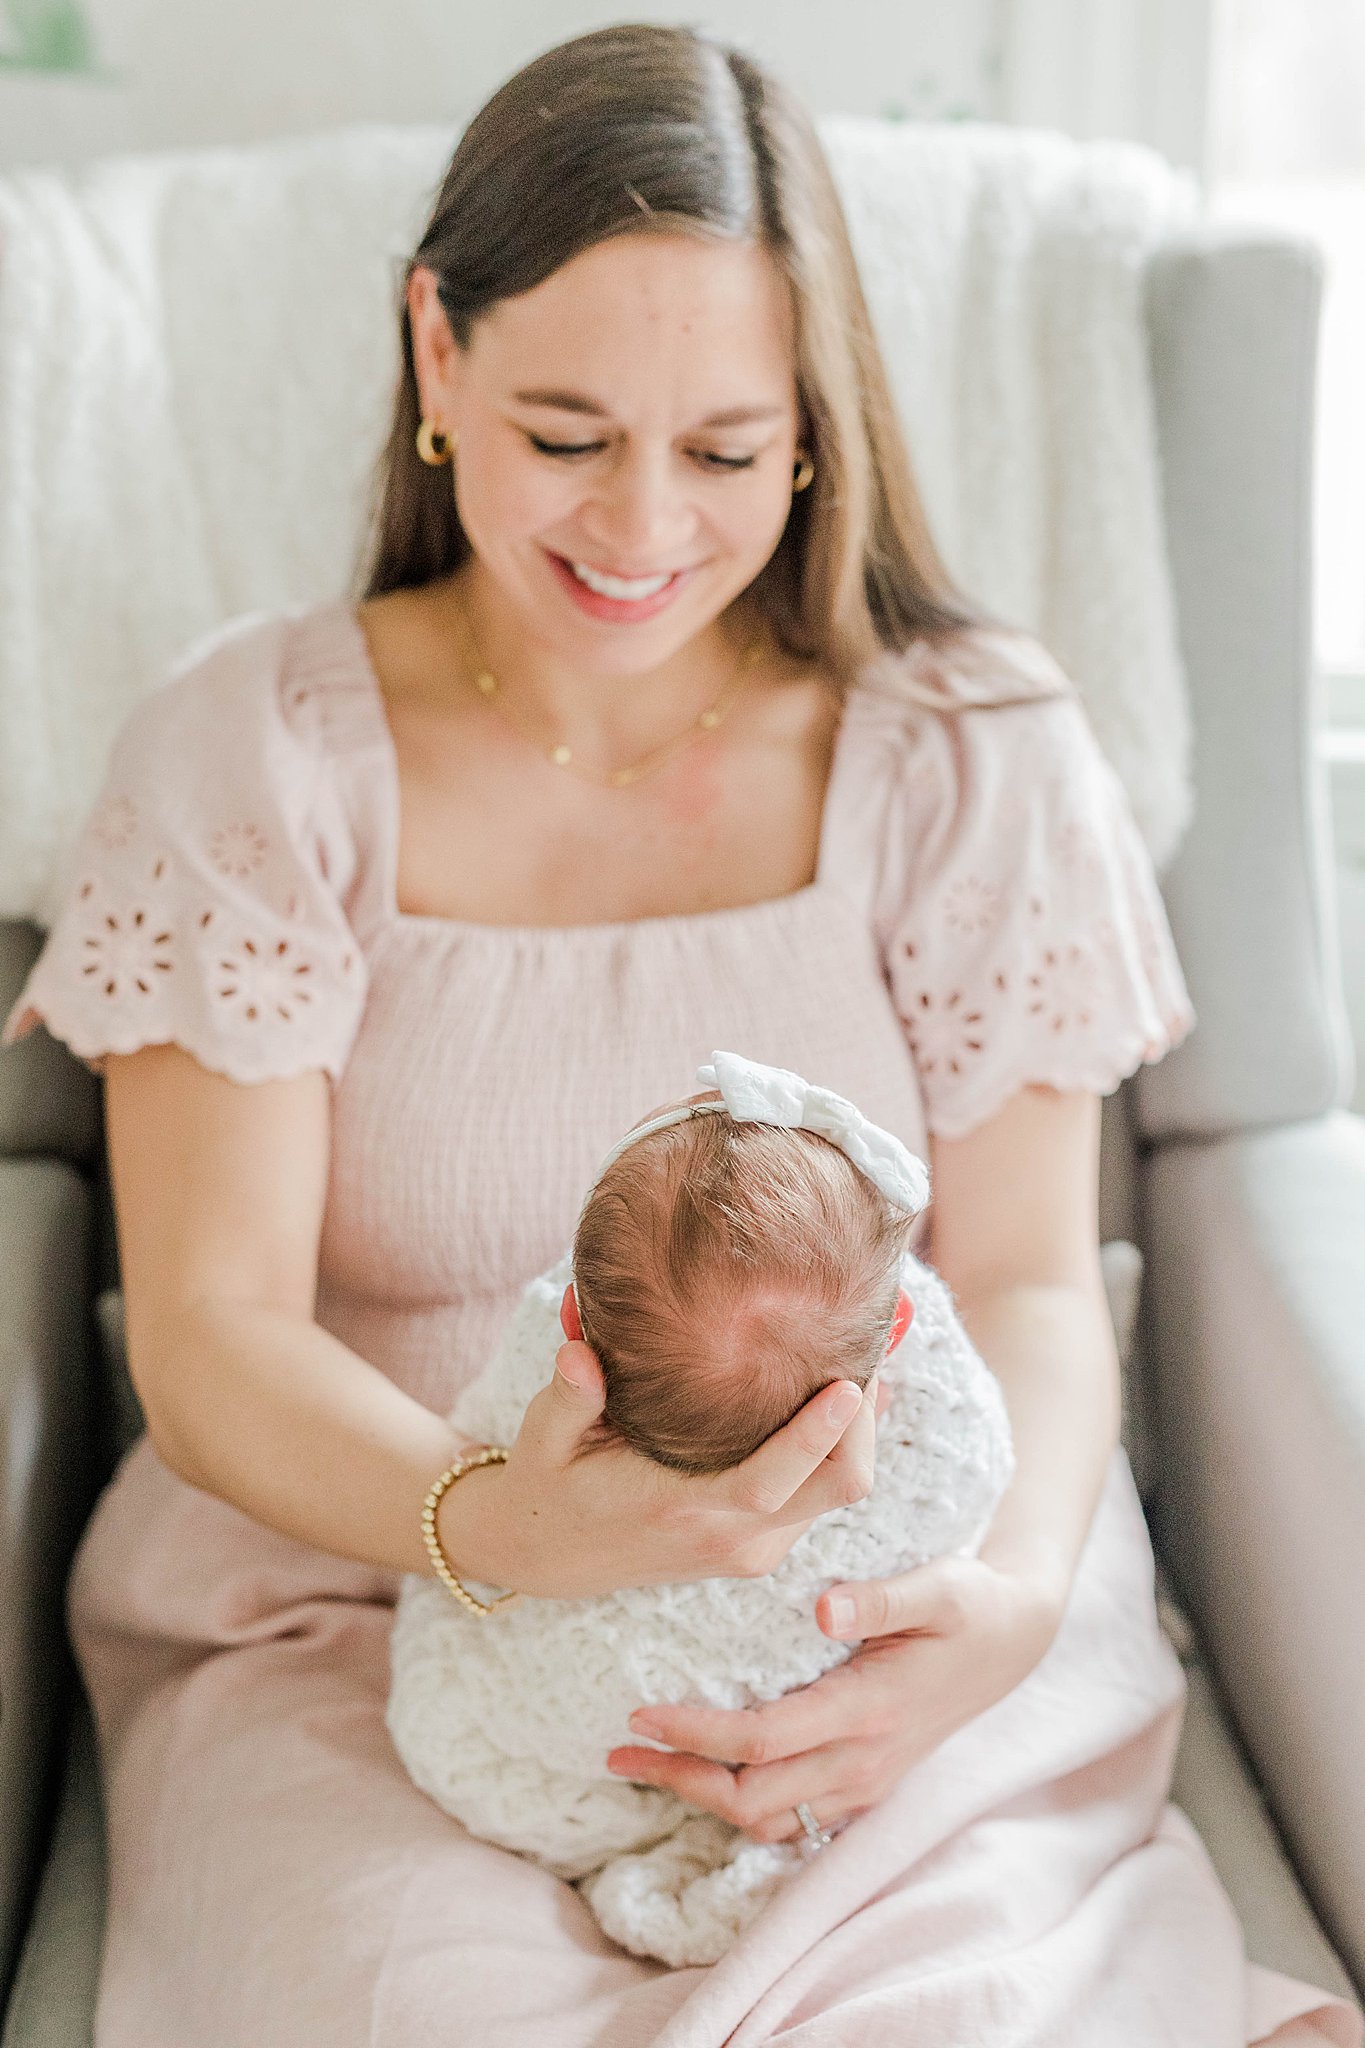 Mom holding daughter at newborn photo session